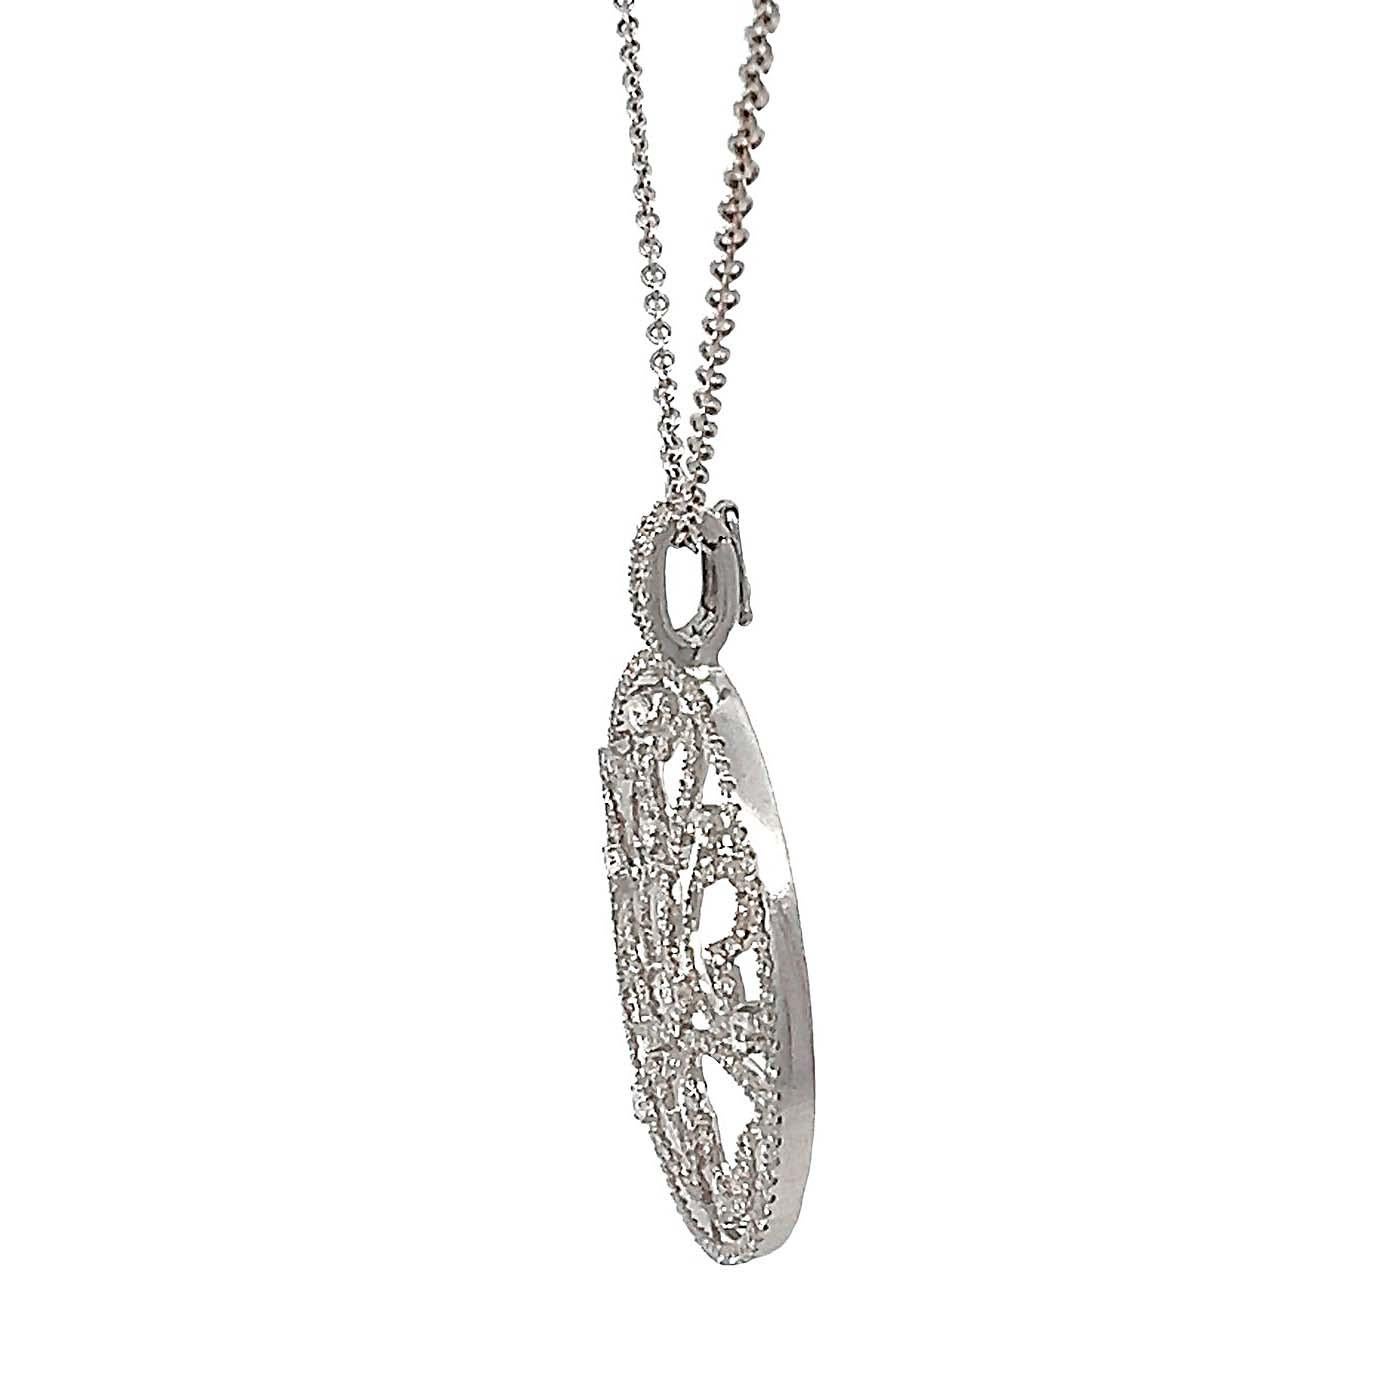 18k White Gold Circular Diamond Pendant Necklace. This exquisite necklace features a timeless diamond pendant on a delicate chain, making it the perfect romantic gift for any special occasion. with an eye-catching design, the circular pendant is